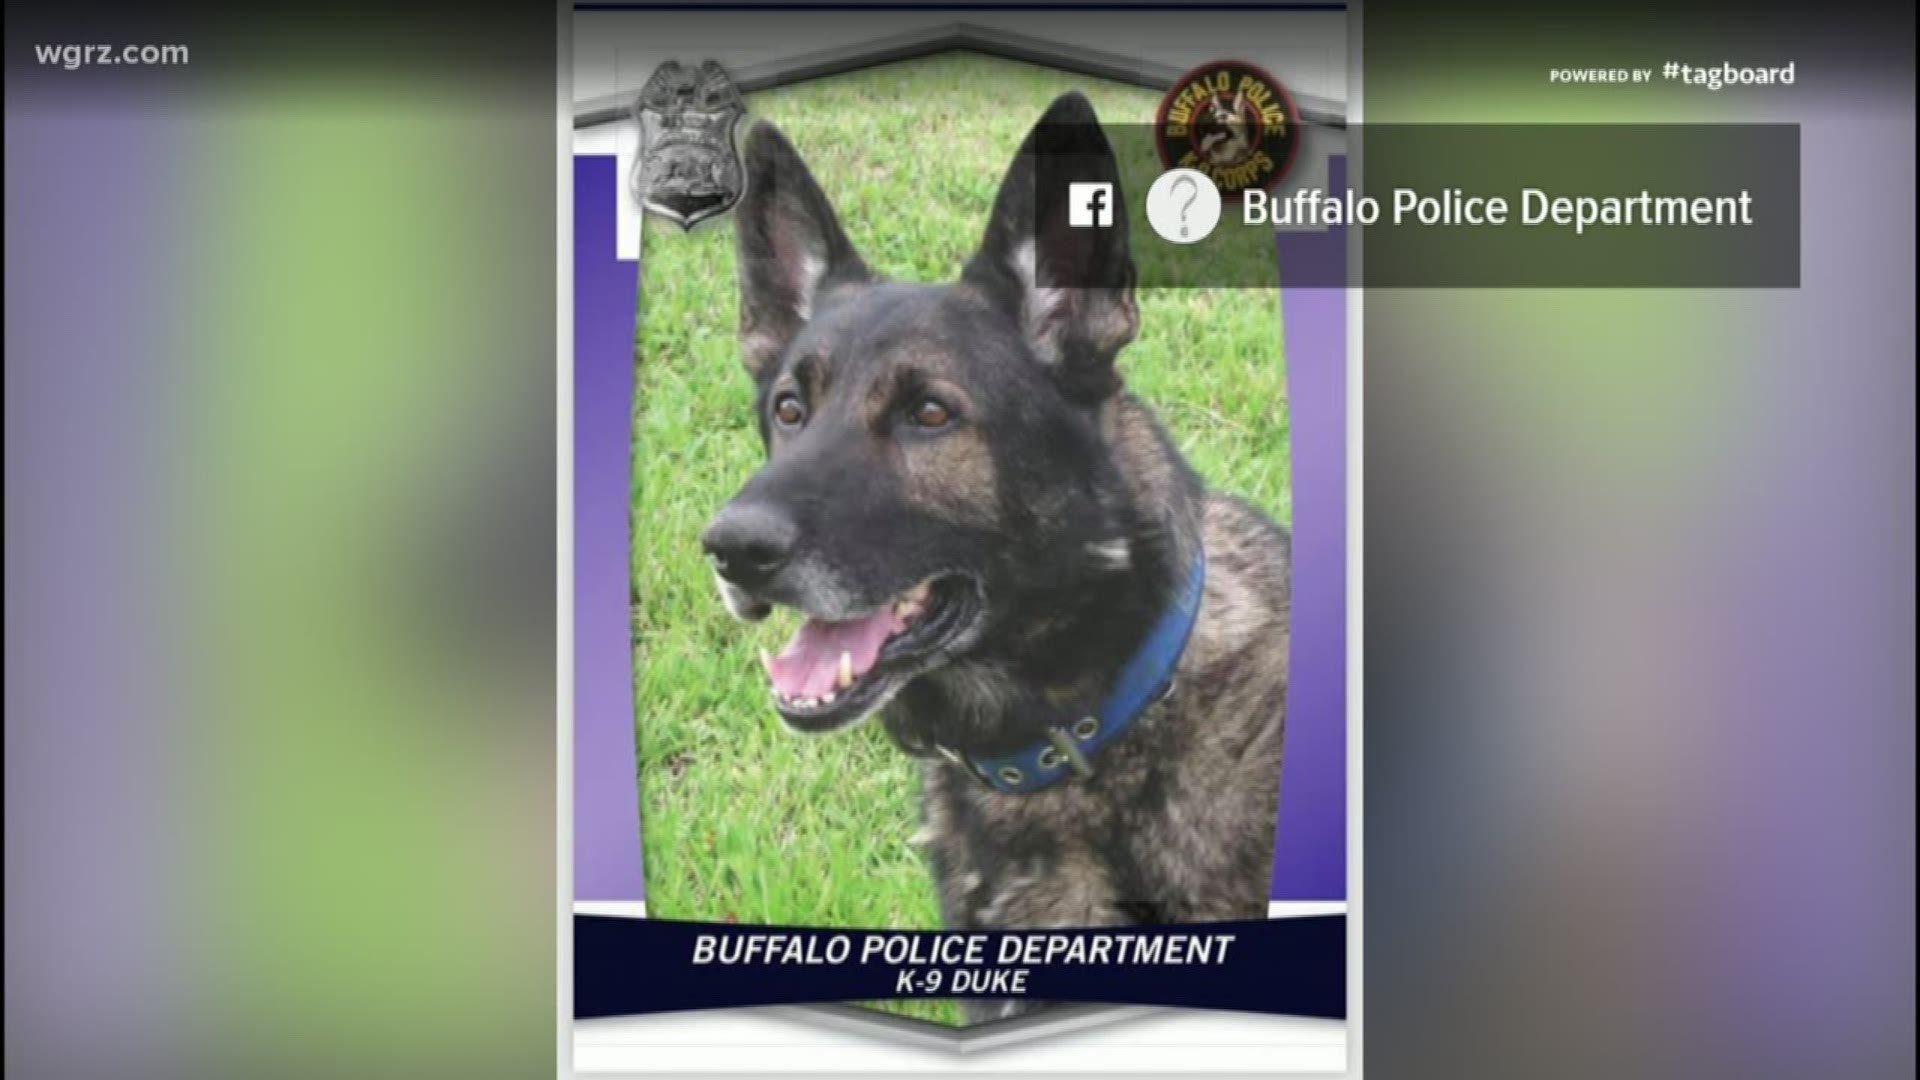 They announced this morning that retired Buffalo K-9 Duke died yesterday...